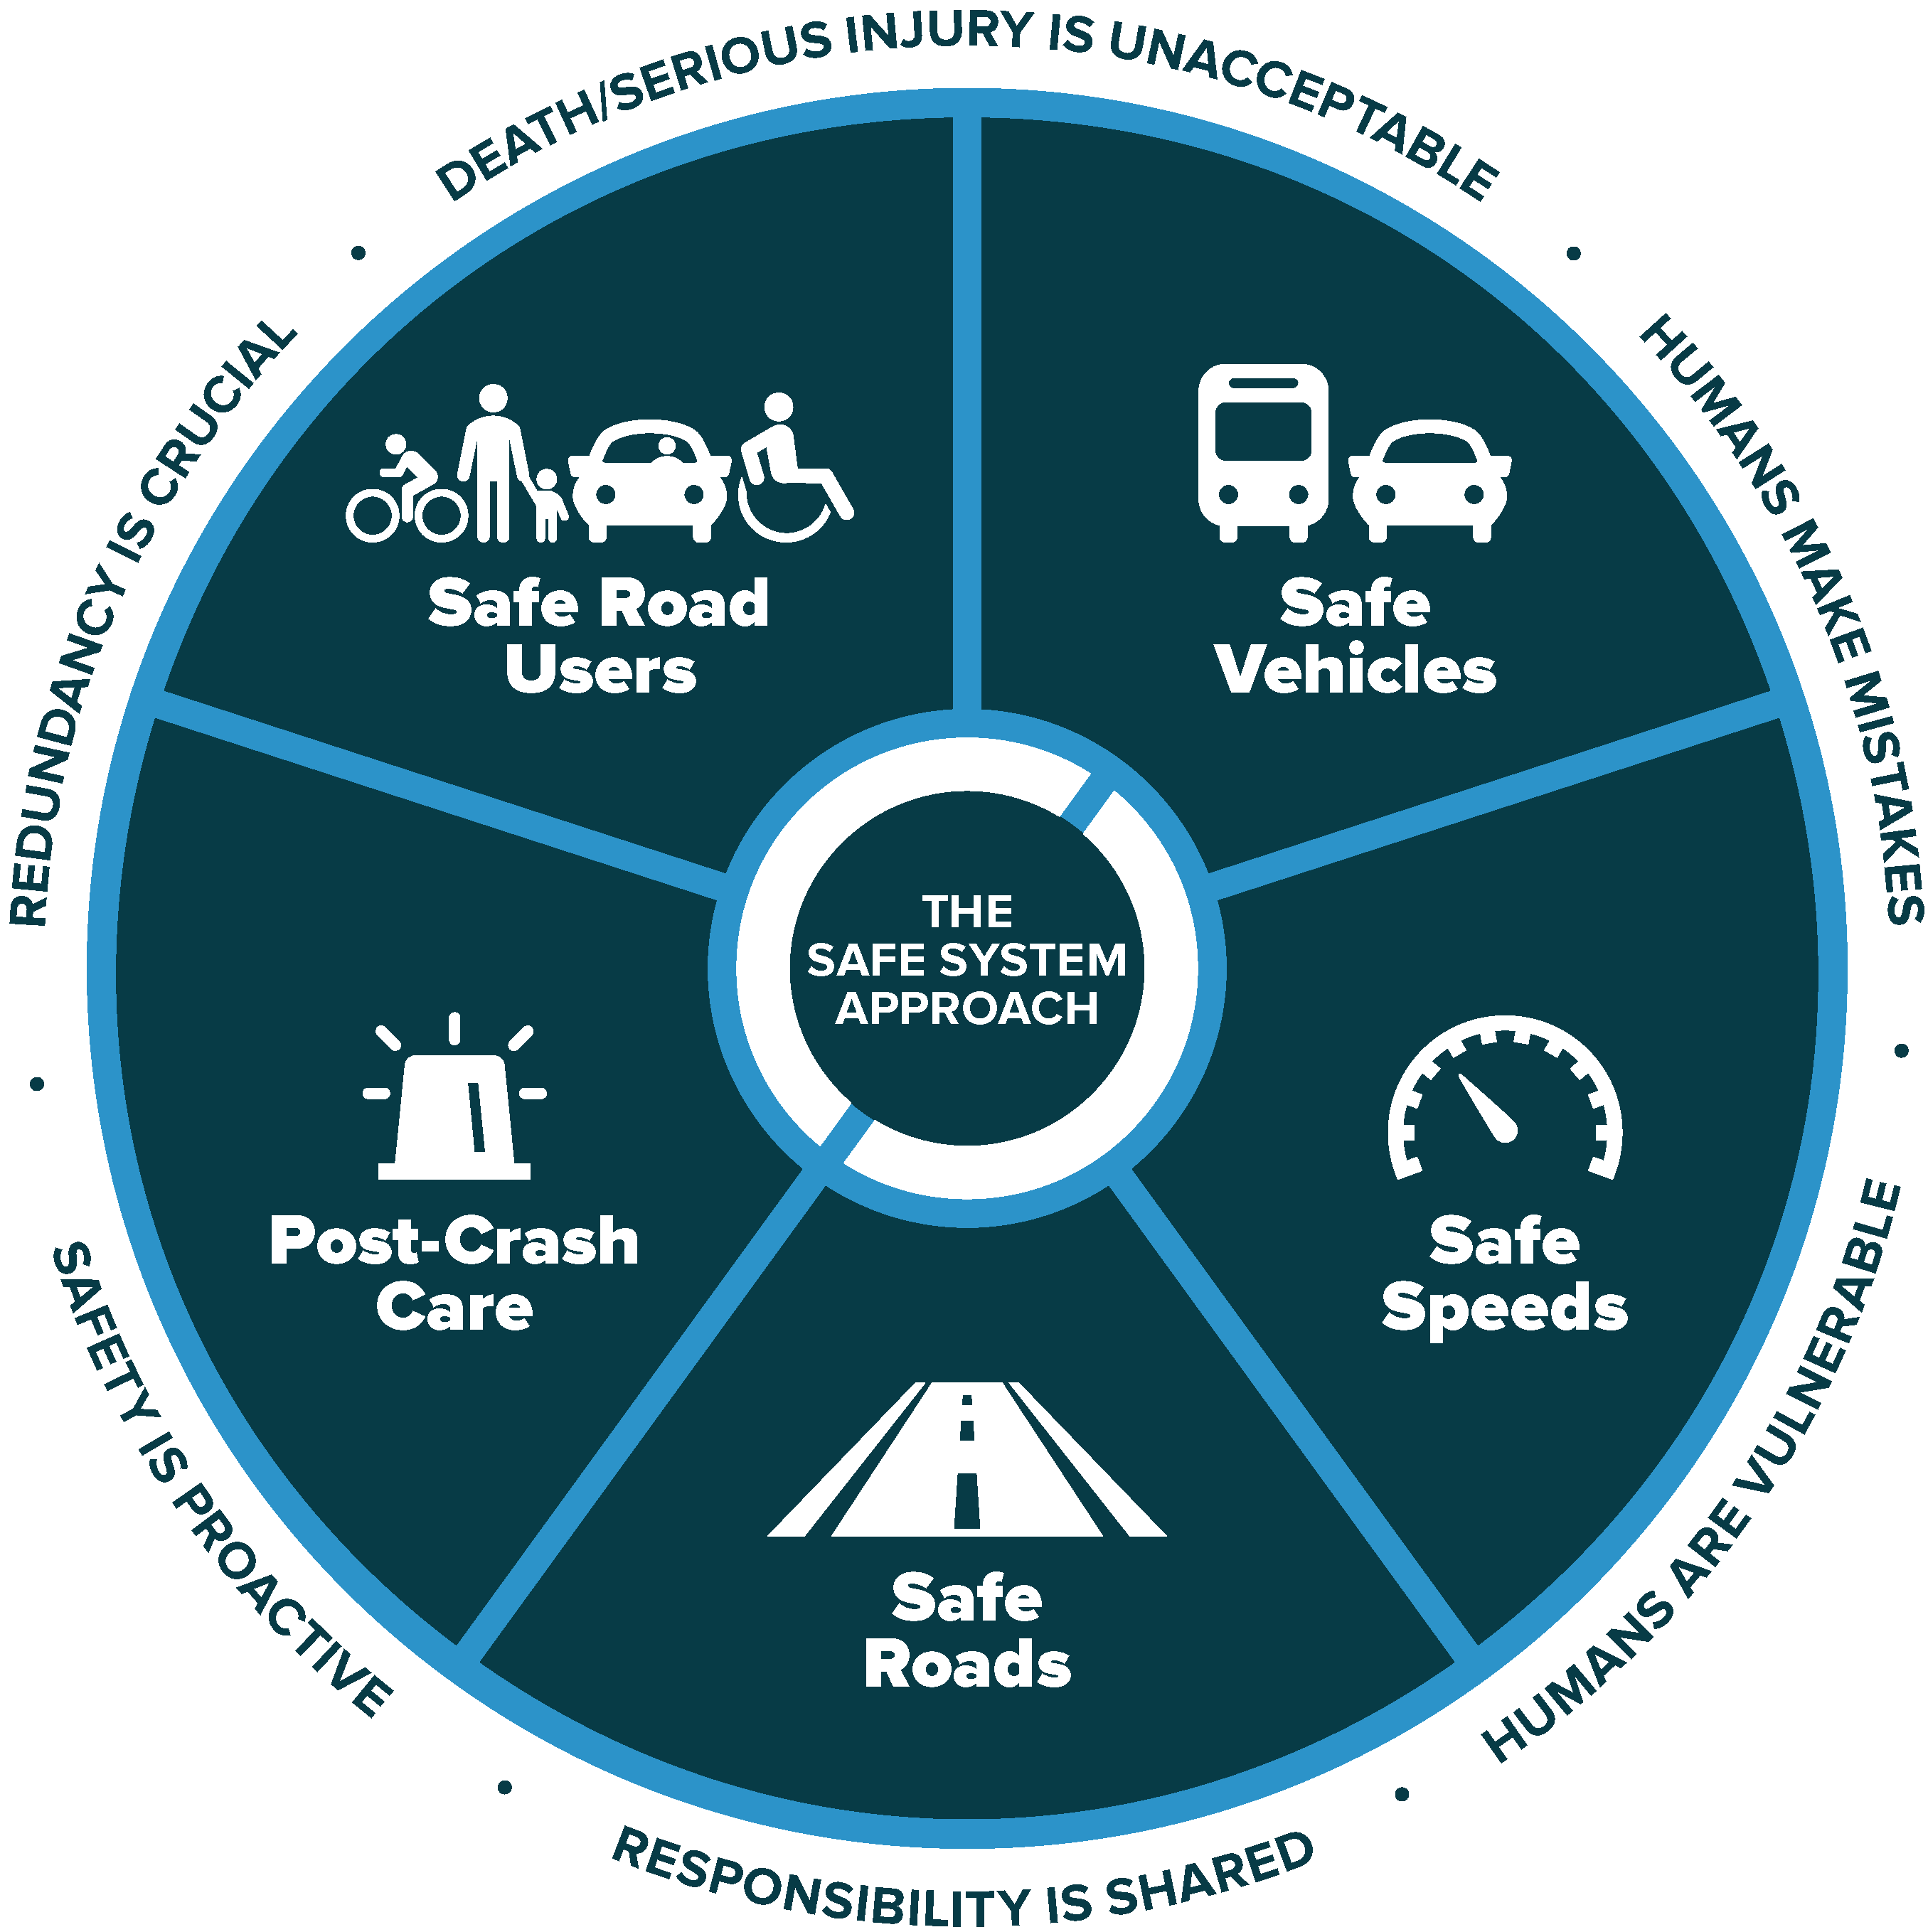 The safe systems approach components include safe road users safe vehicles safe speeds safe roads and post crash care